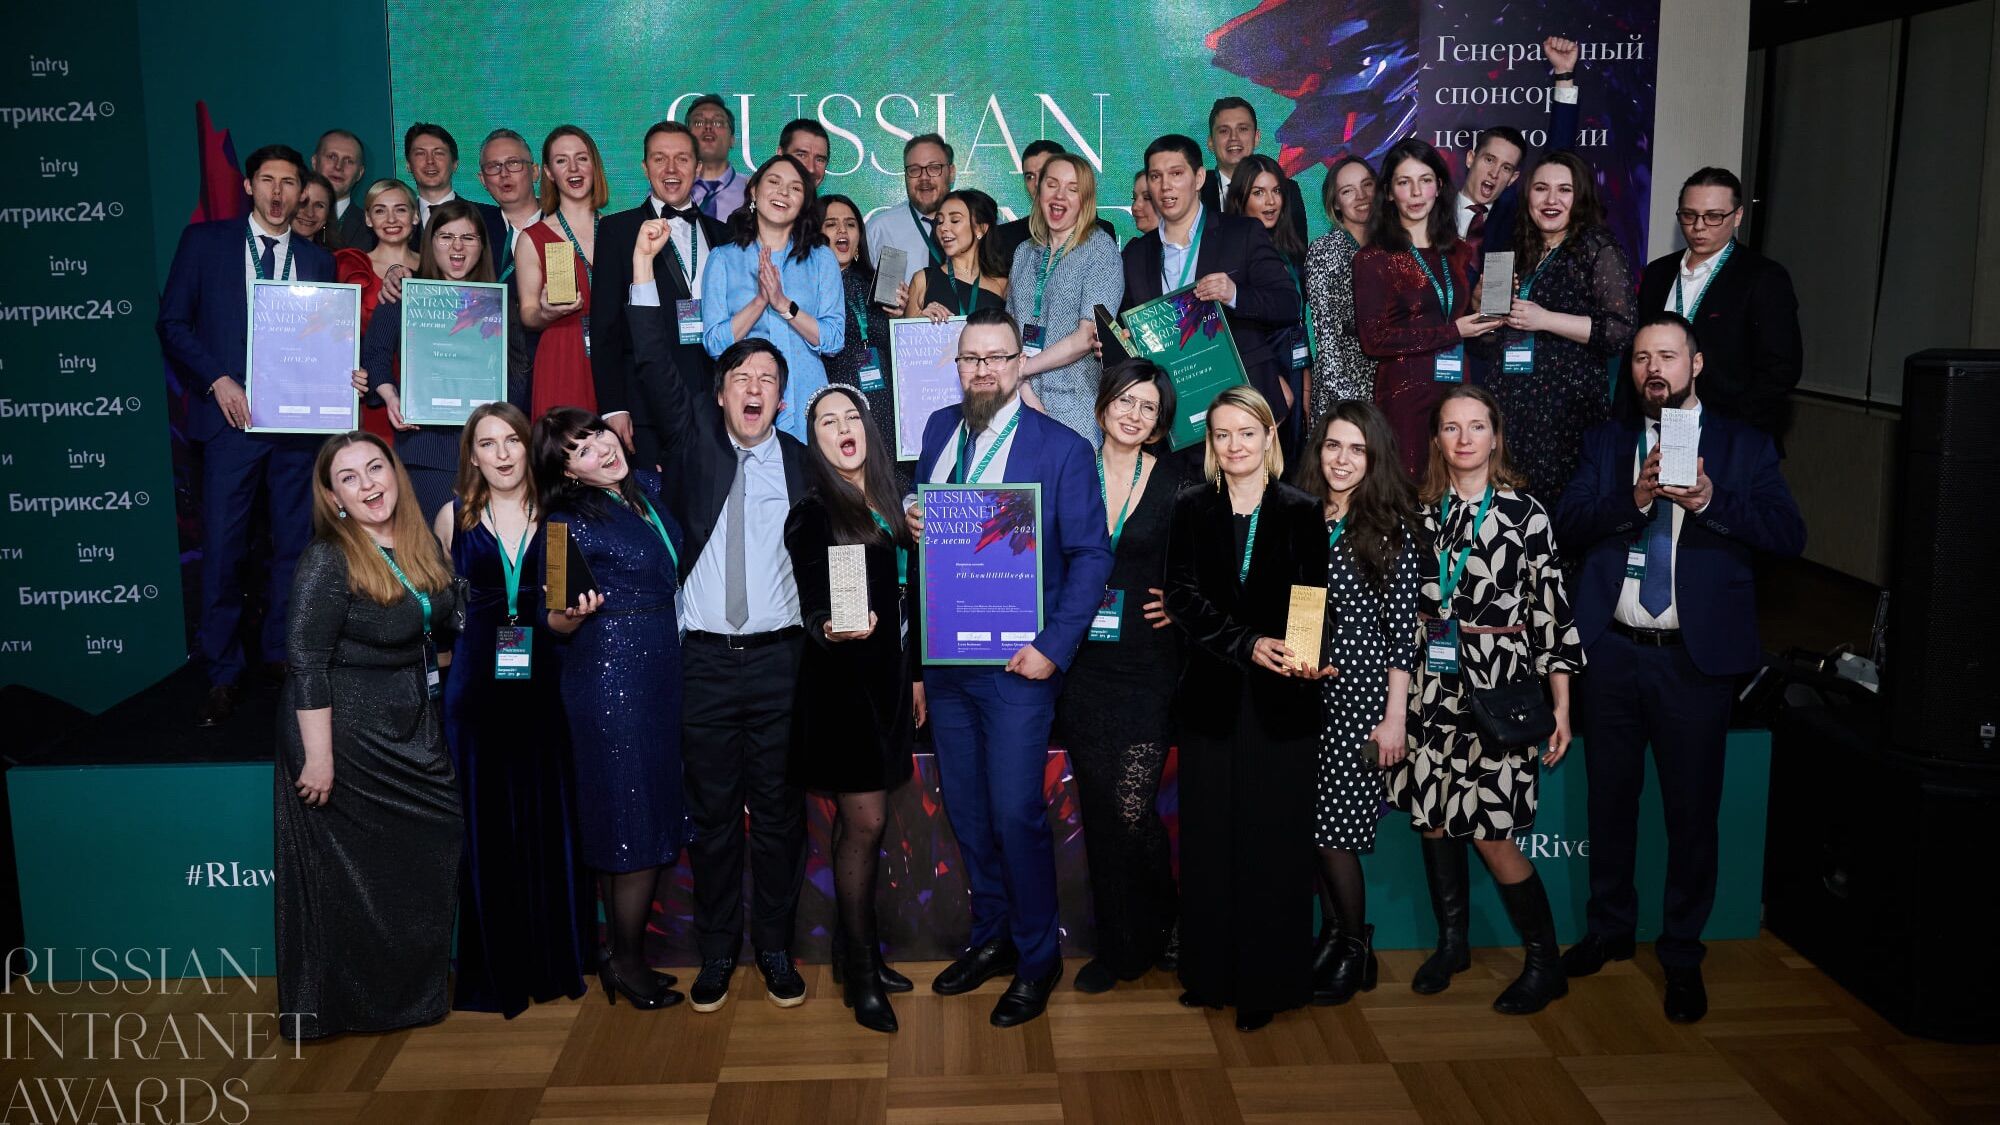 We develop the intranet industry in Russia and organize the Russian Intranet Awards